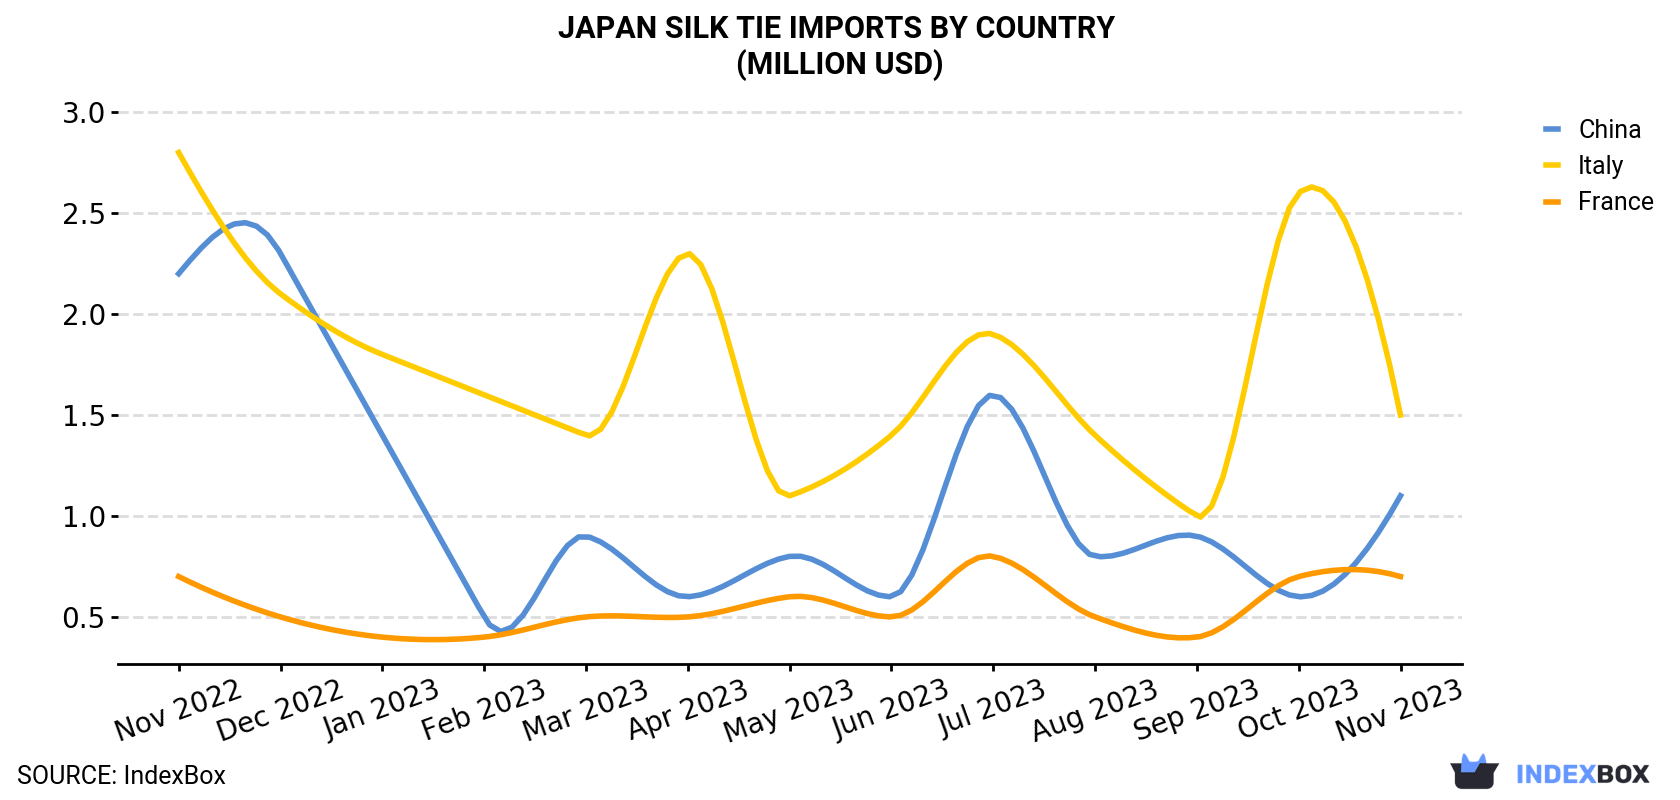 Japan Silk Tie Imports By Country (Million USD)